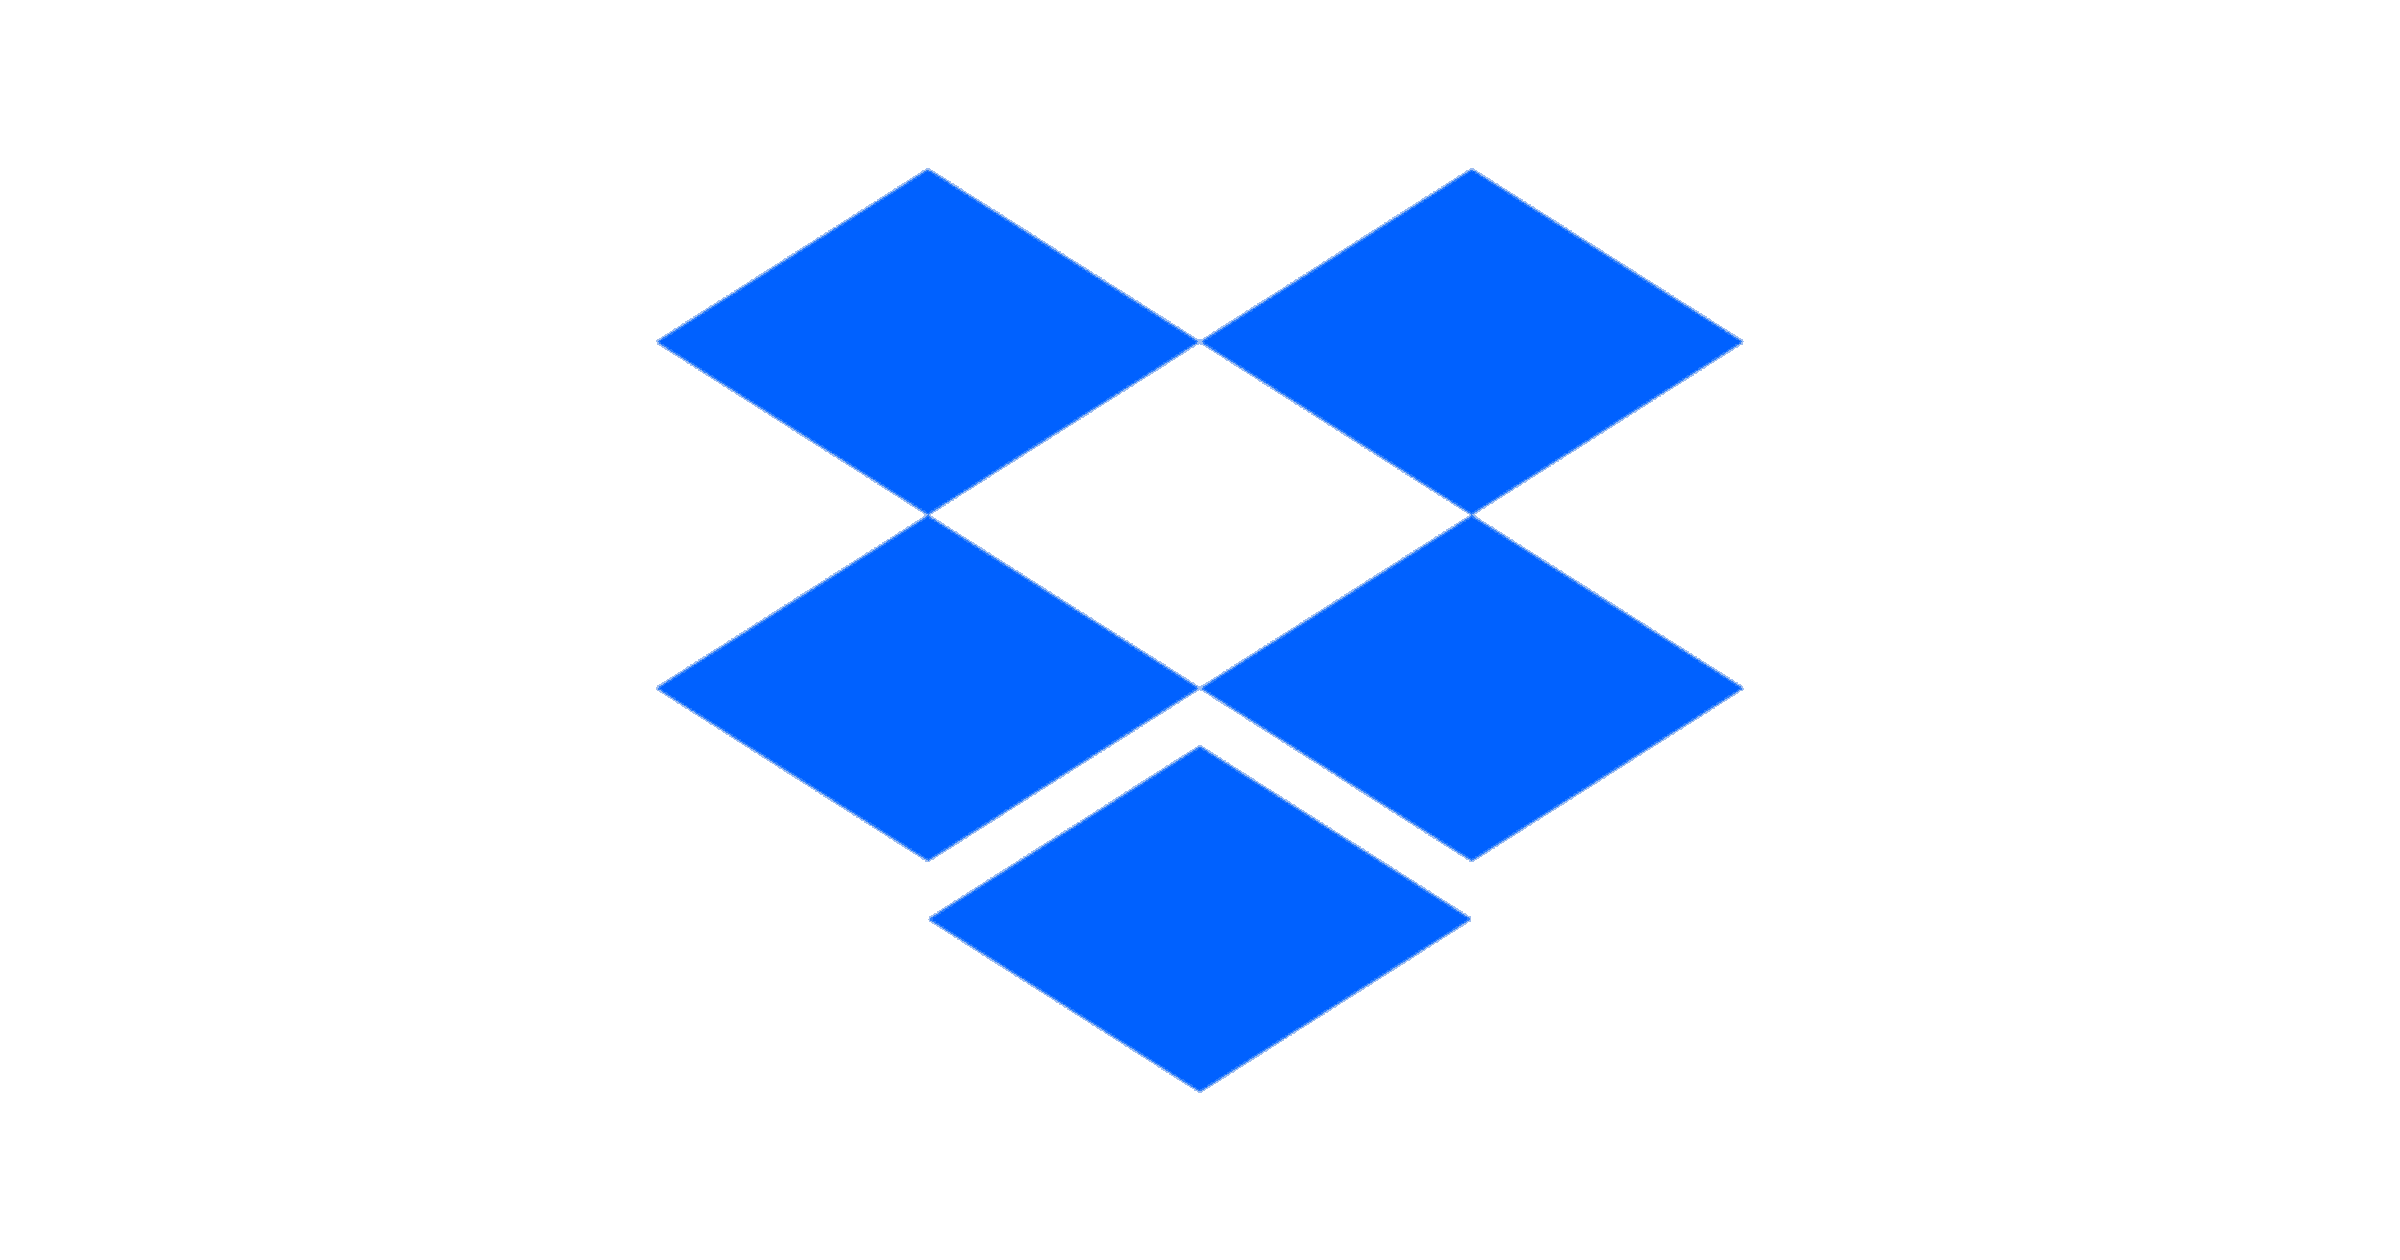 Dropbox ‘Actively Working’ on Full macOS Monterey 12.3 Support